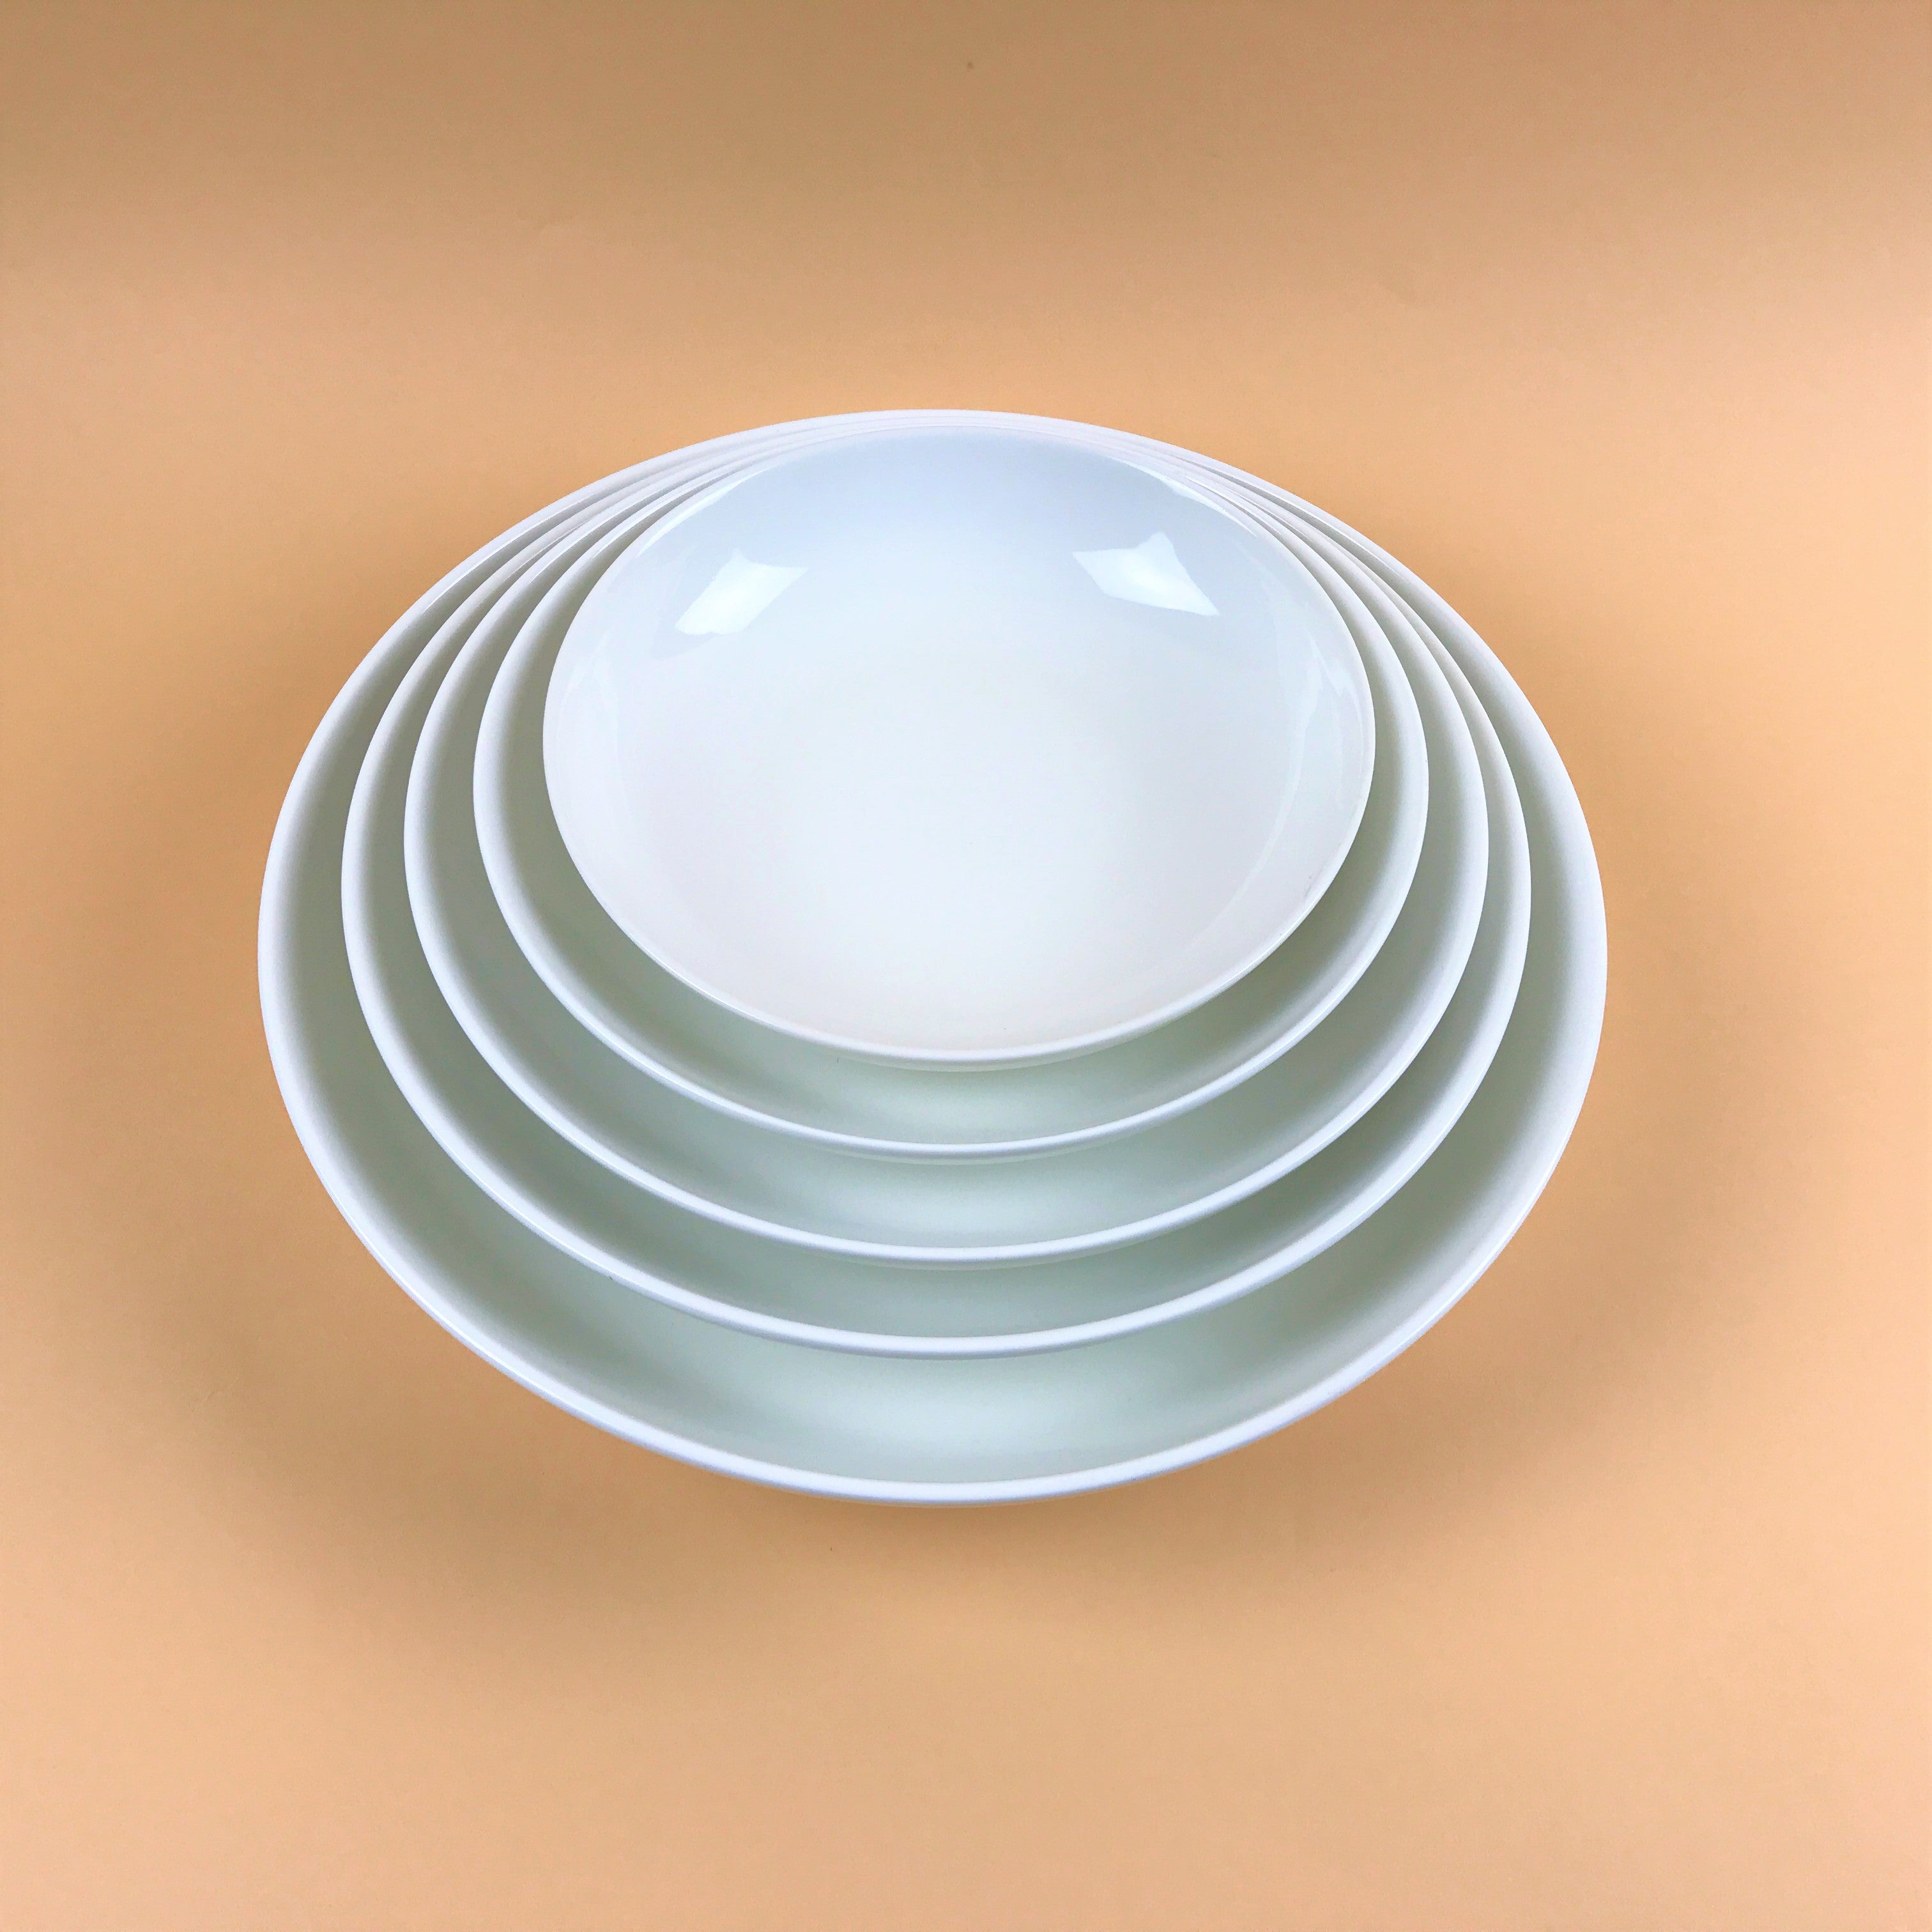 White Durable Round Oval Plates Restaurant Supply Bowery Discount Sale OSARA New York